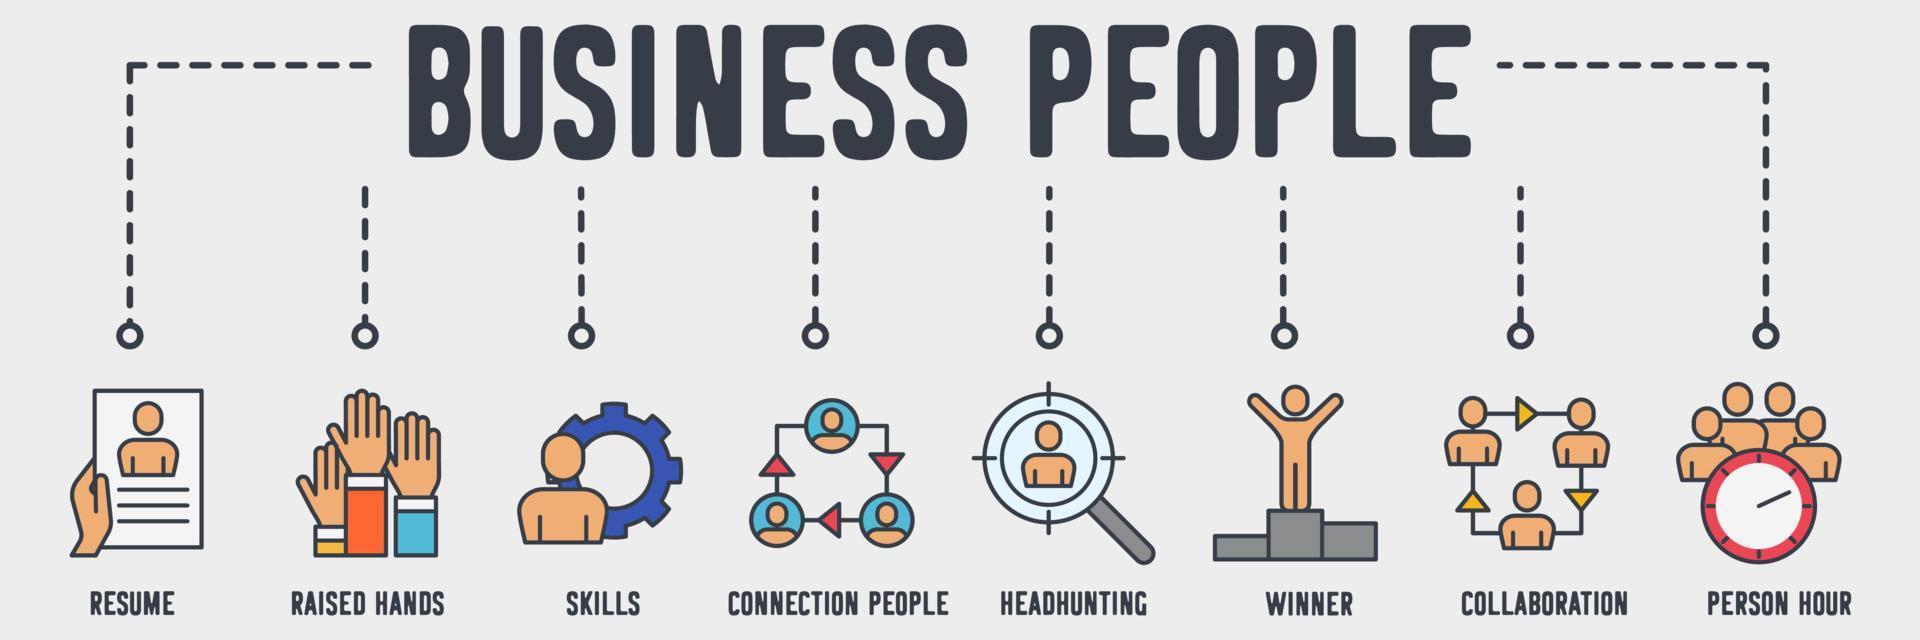 Business People banner web icon. resume, raised hands, skills, connection people, headhunting, winner, collaboration, person hour vector illustration concept.